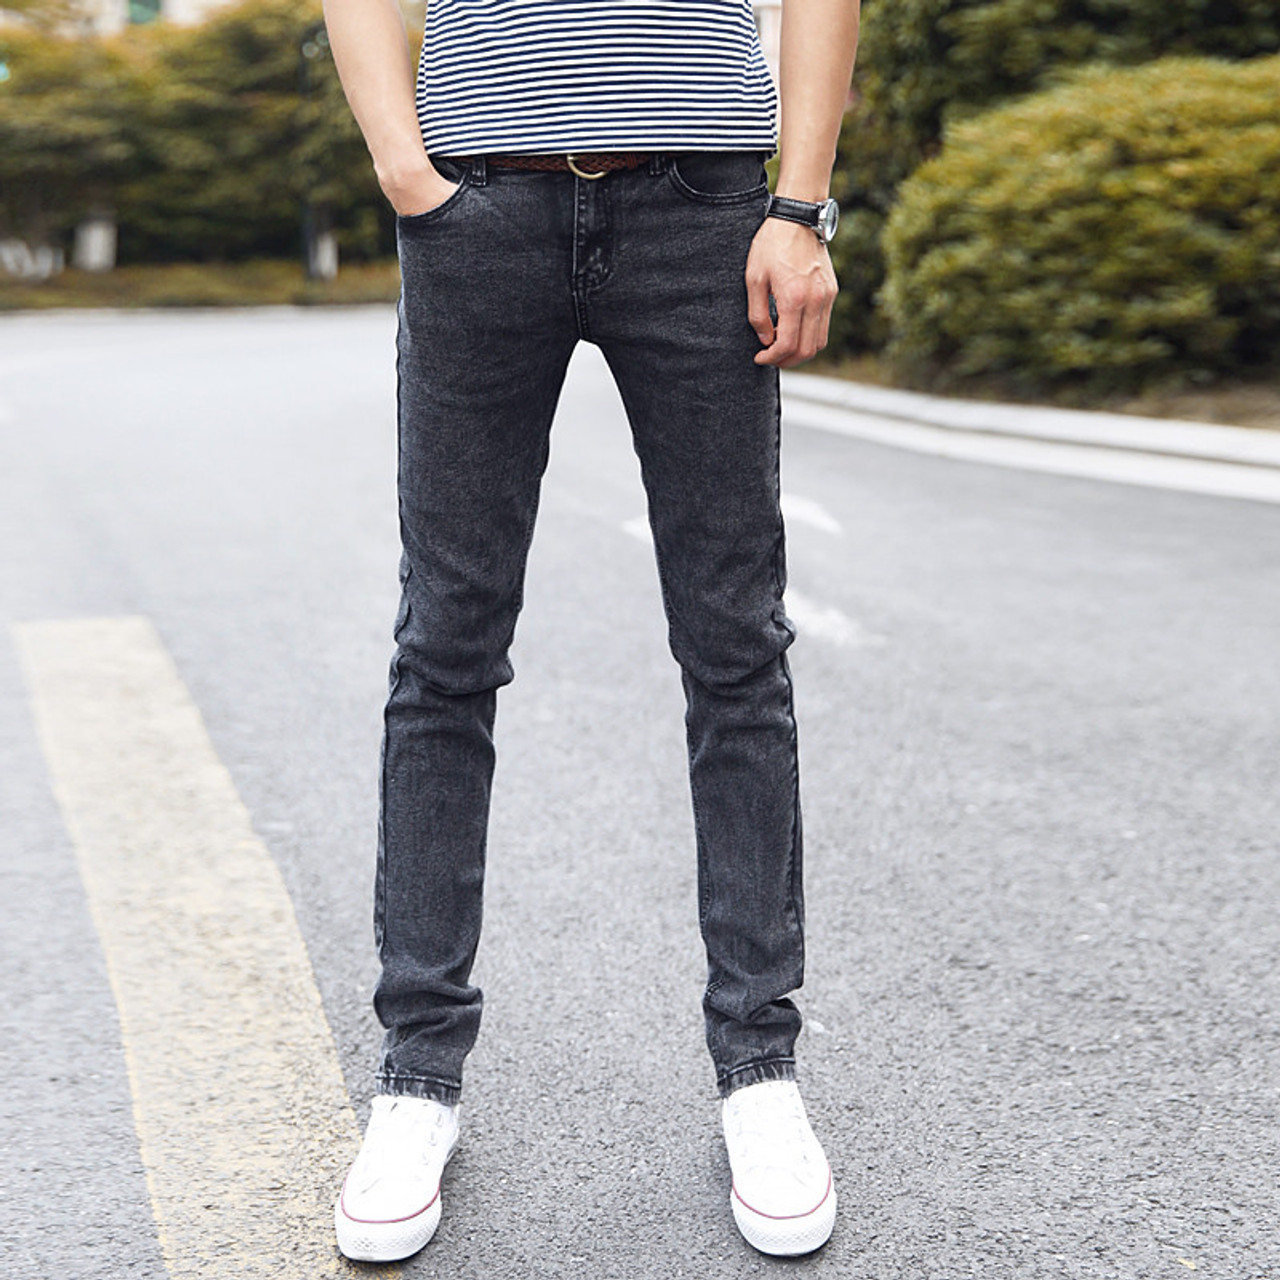 Men's Skinny Grey Trousers | Skinny Grey Checked Trousers | Next